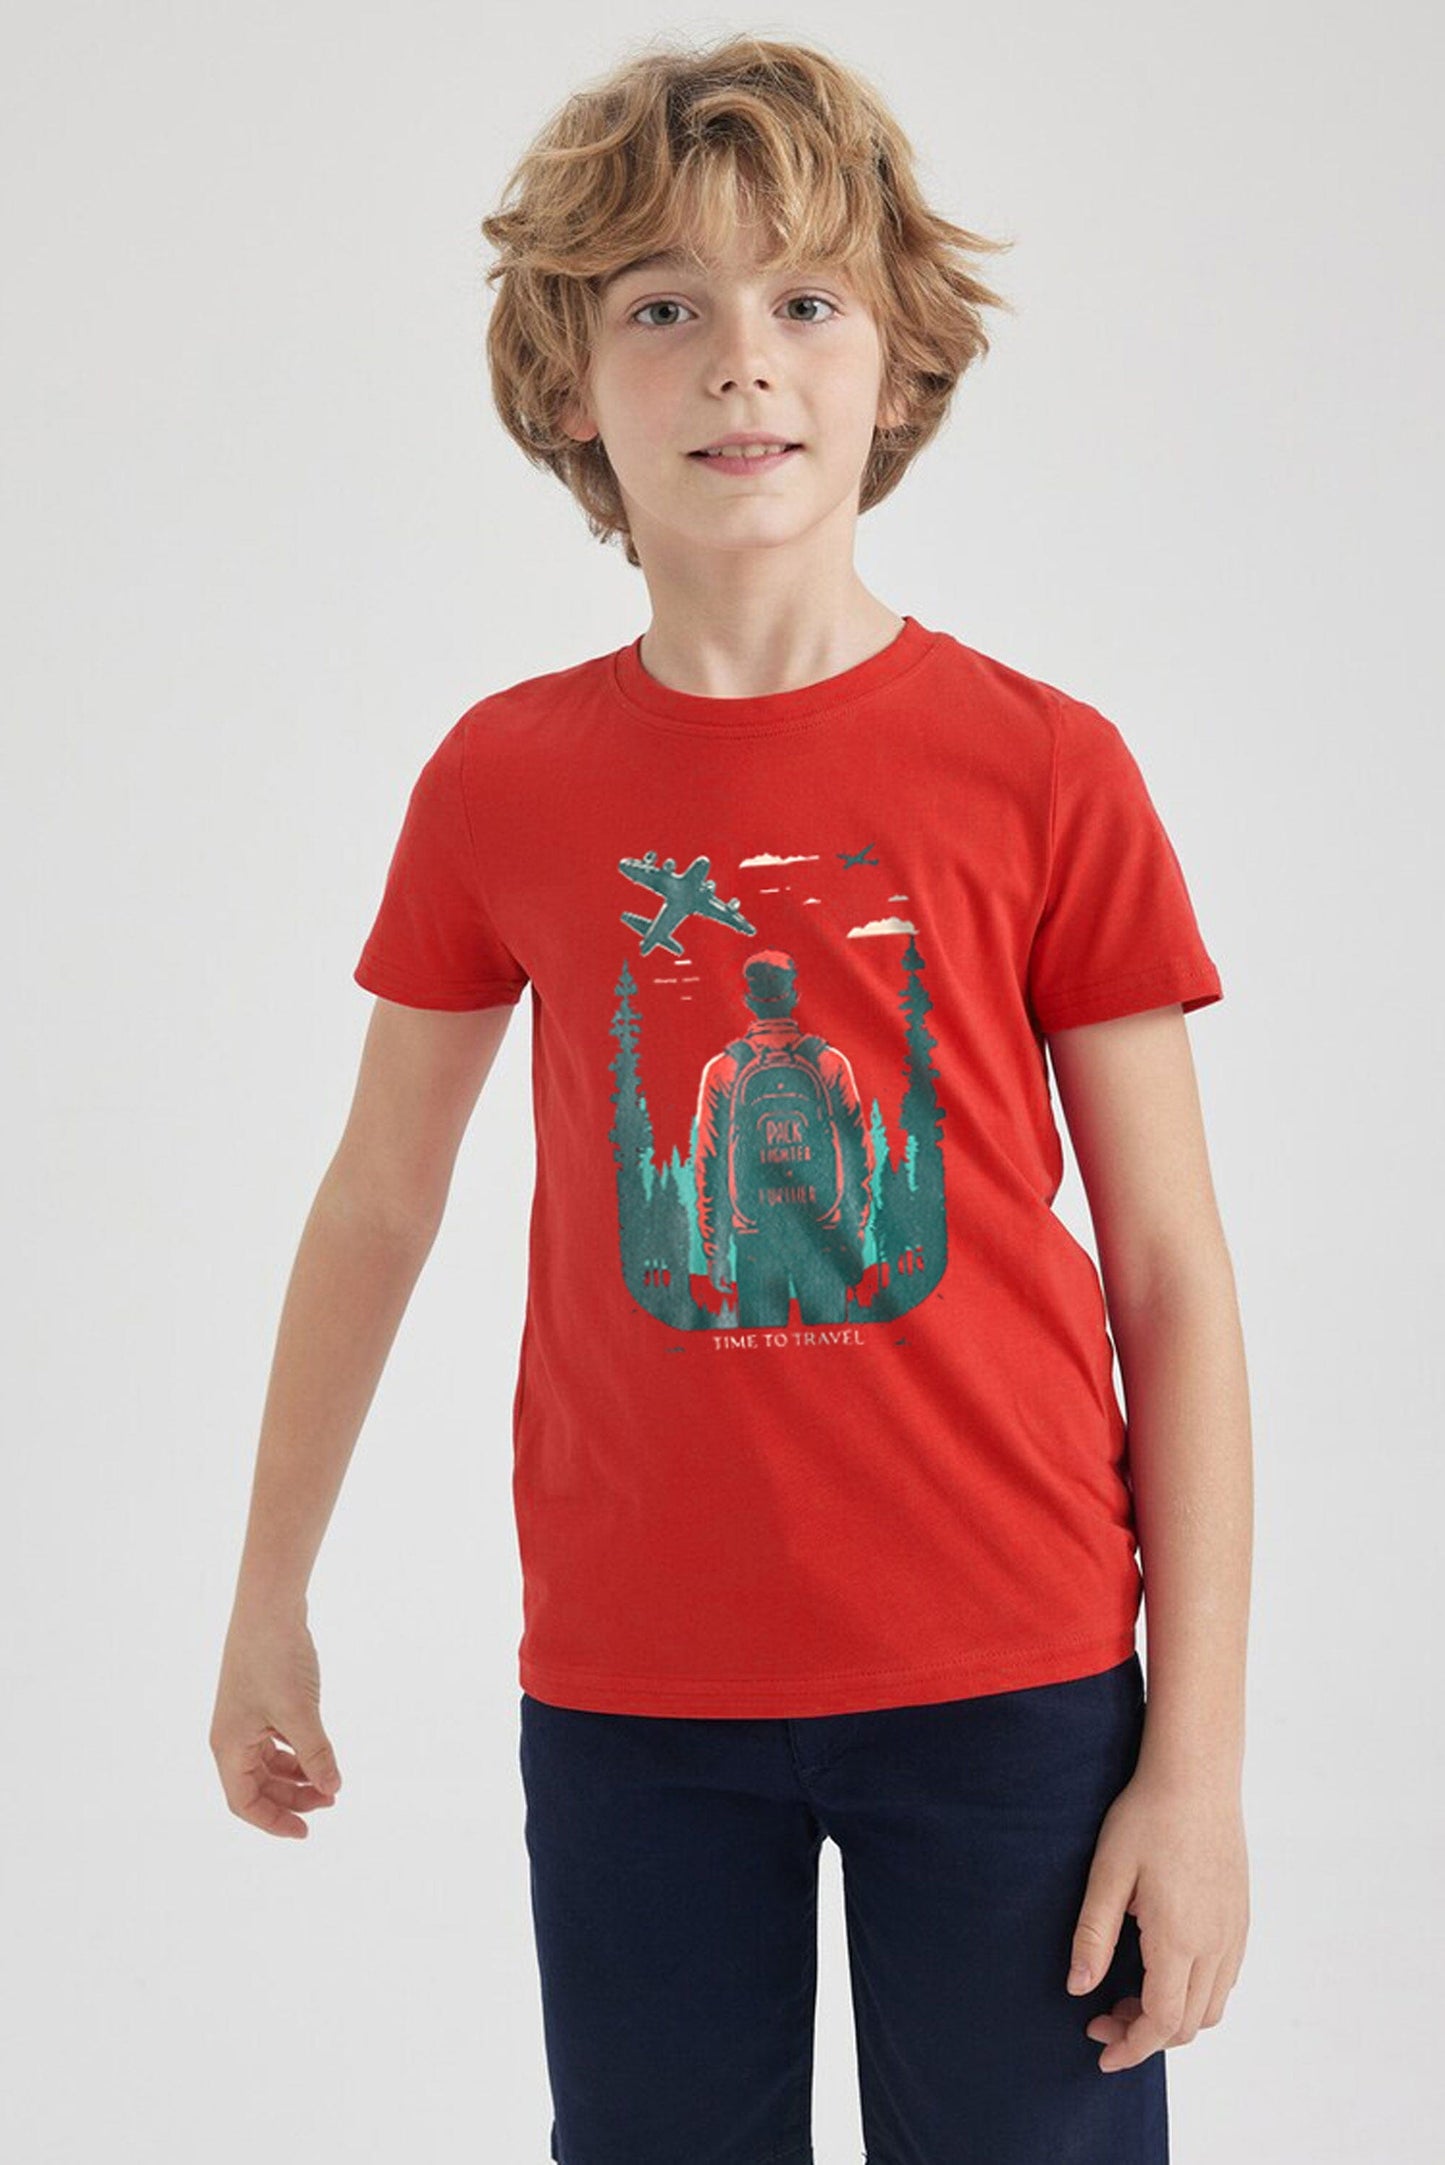 Polo Republica Boy's Time To Travel Printed Tee Shirt Boy's Tee Shirt Polo Republica 